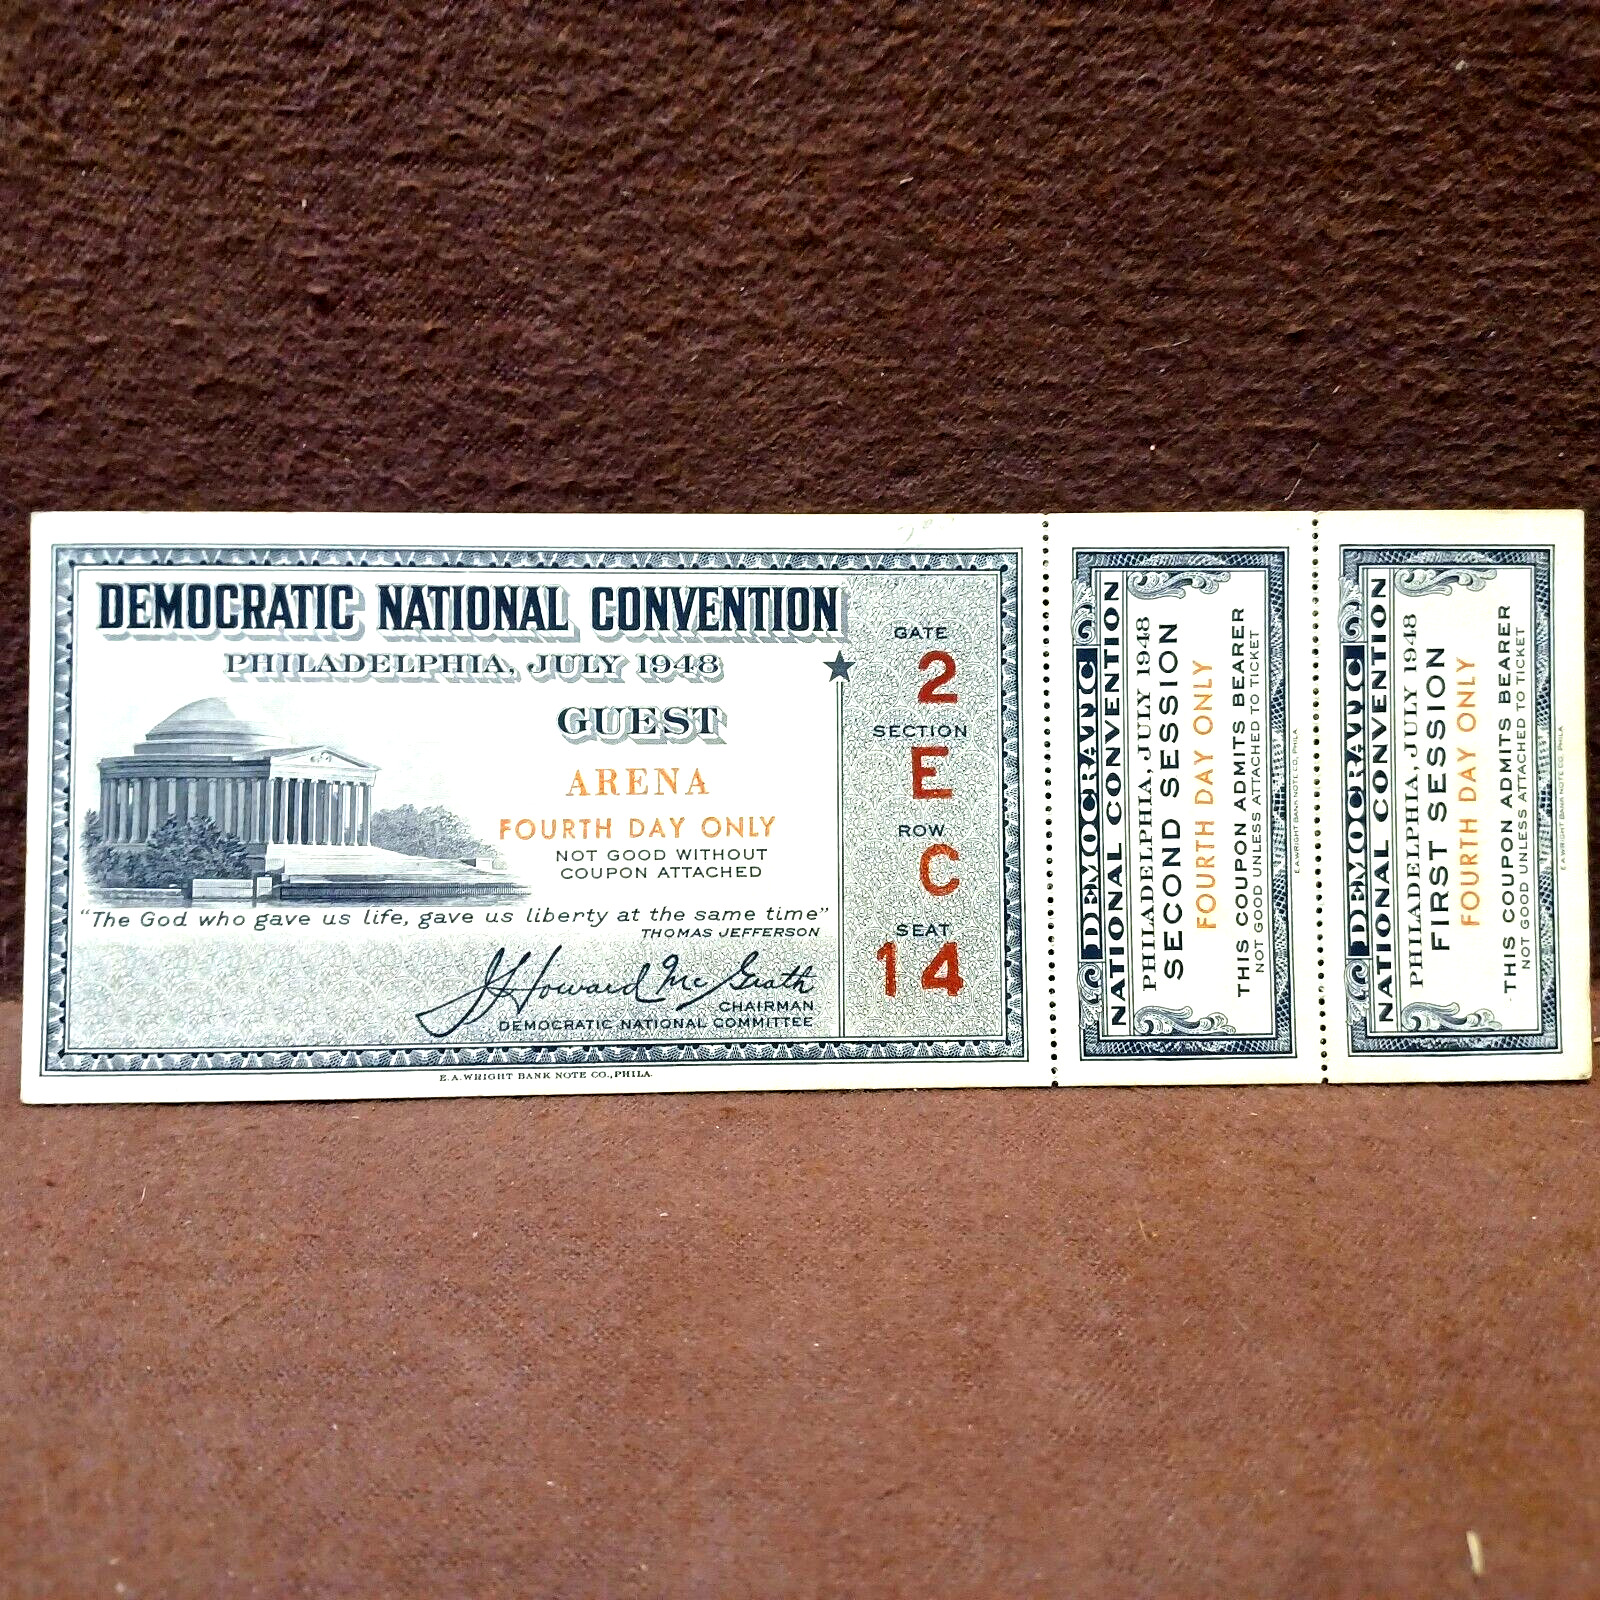 DEMOCRATIC NATIONAL CONVENTION Ticket 1948 First Second Session Coupons